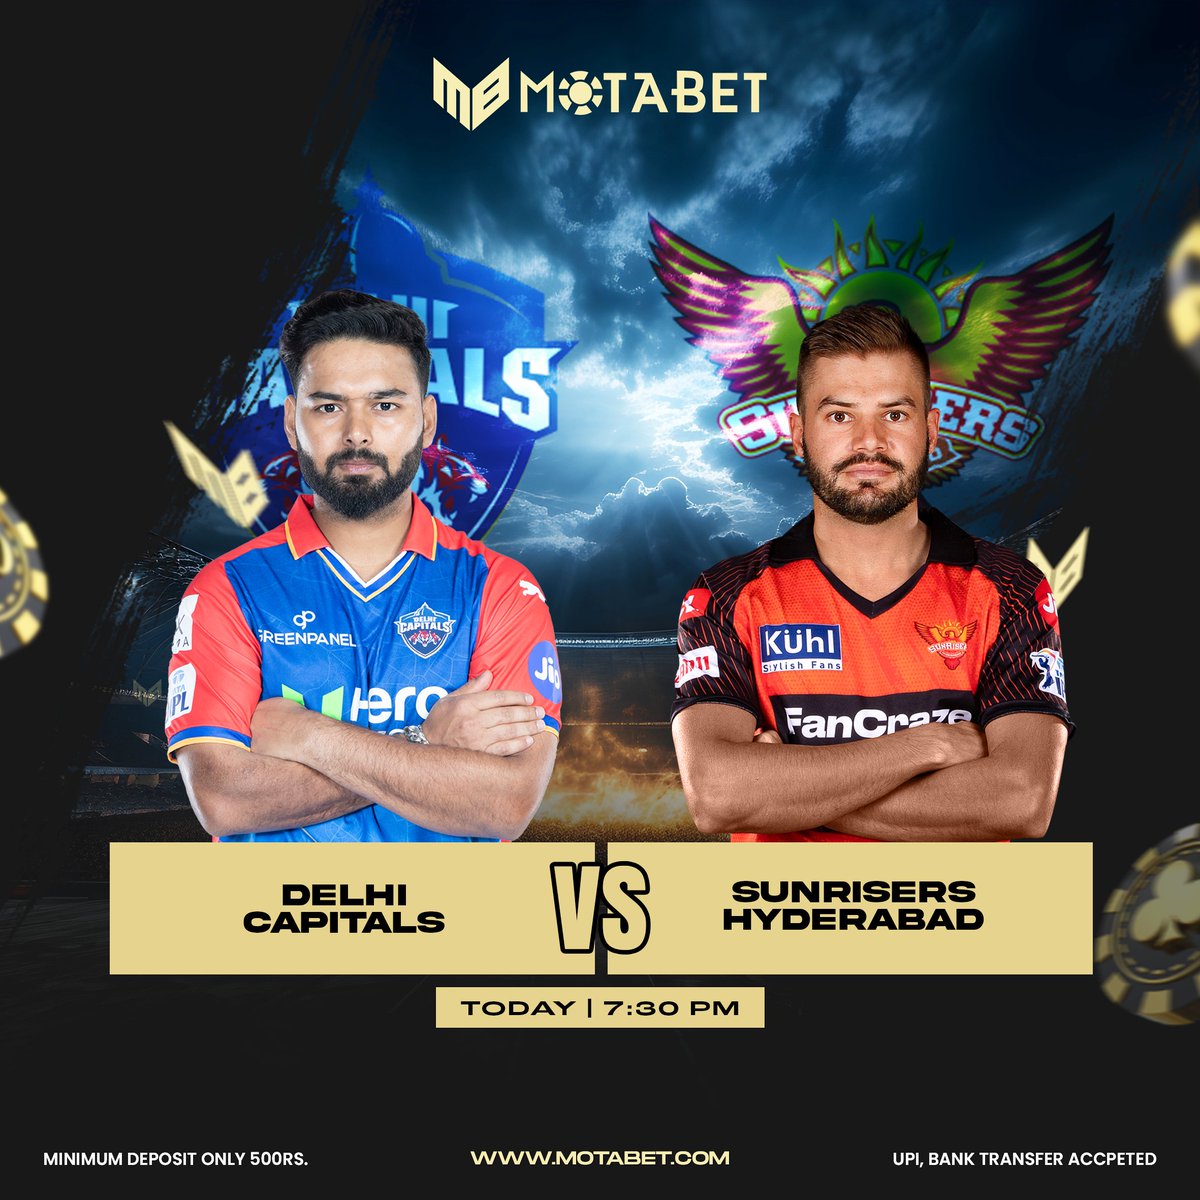 It's finally happening! The @DelhiCapitals are back in the capital for the first time this season, taking on the free-scoring juggernaut, the @SunrisersHyderabad! ️
#DCvsSRH #IPL2024 #OrangeArmy #DelhiCapitals #Cricket #MatchDay #T20 #Head2Head #BowlingAttack #ExplosiveBatting